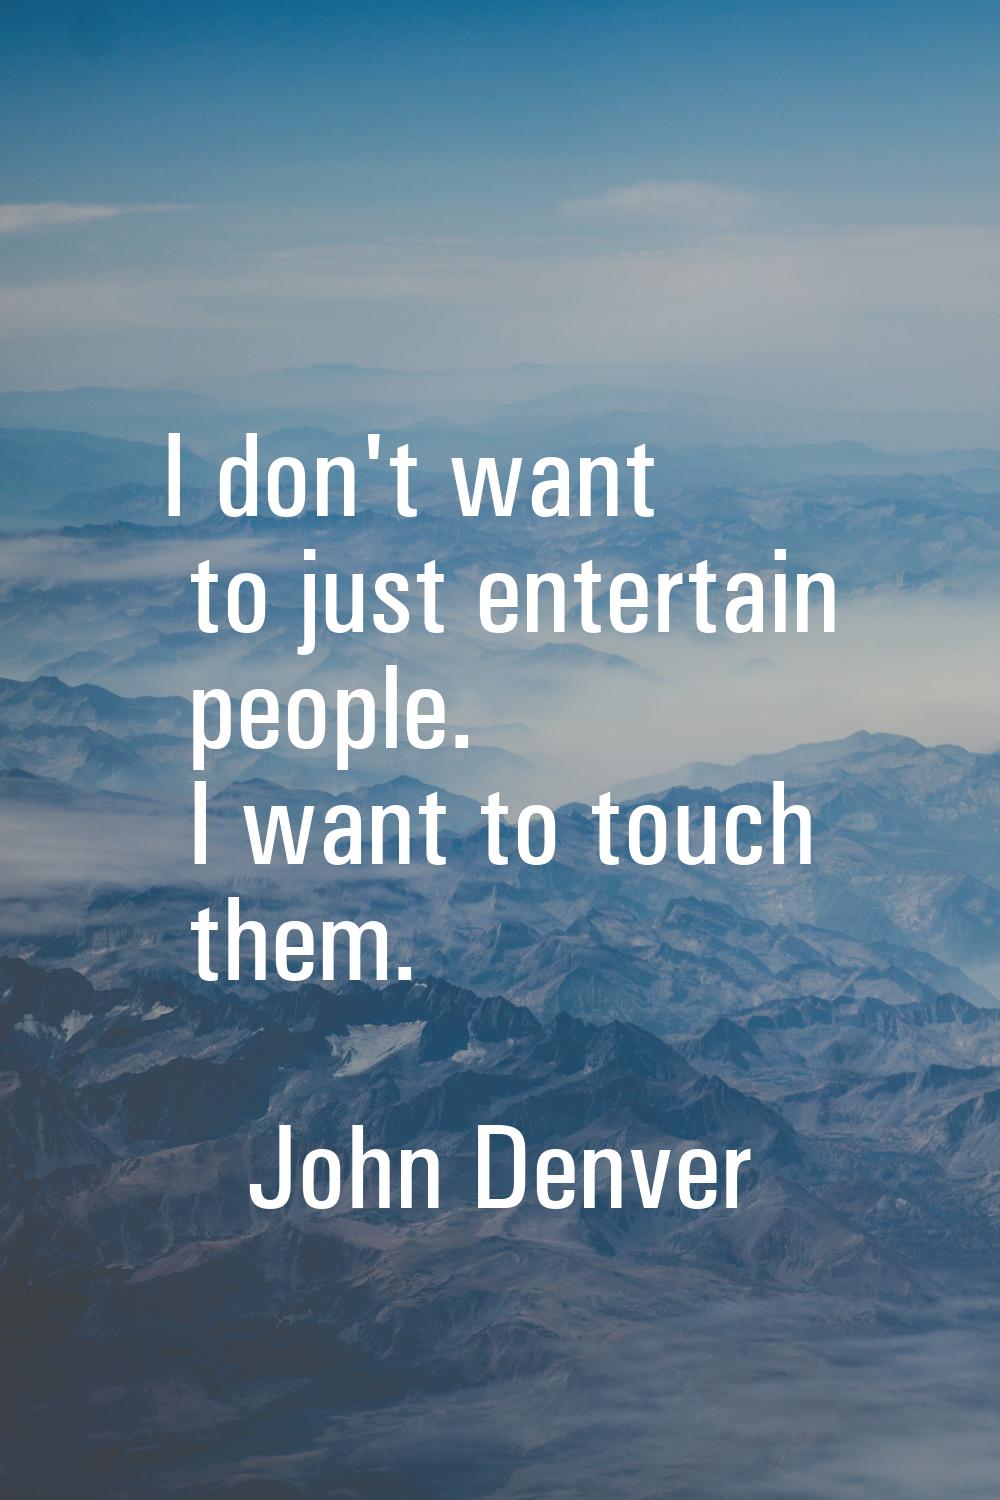 I don't want to just entertain people. I want to touch them.